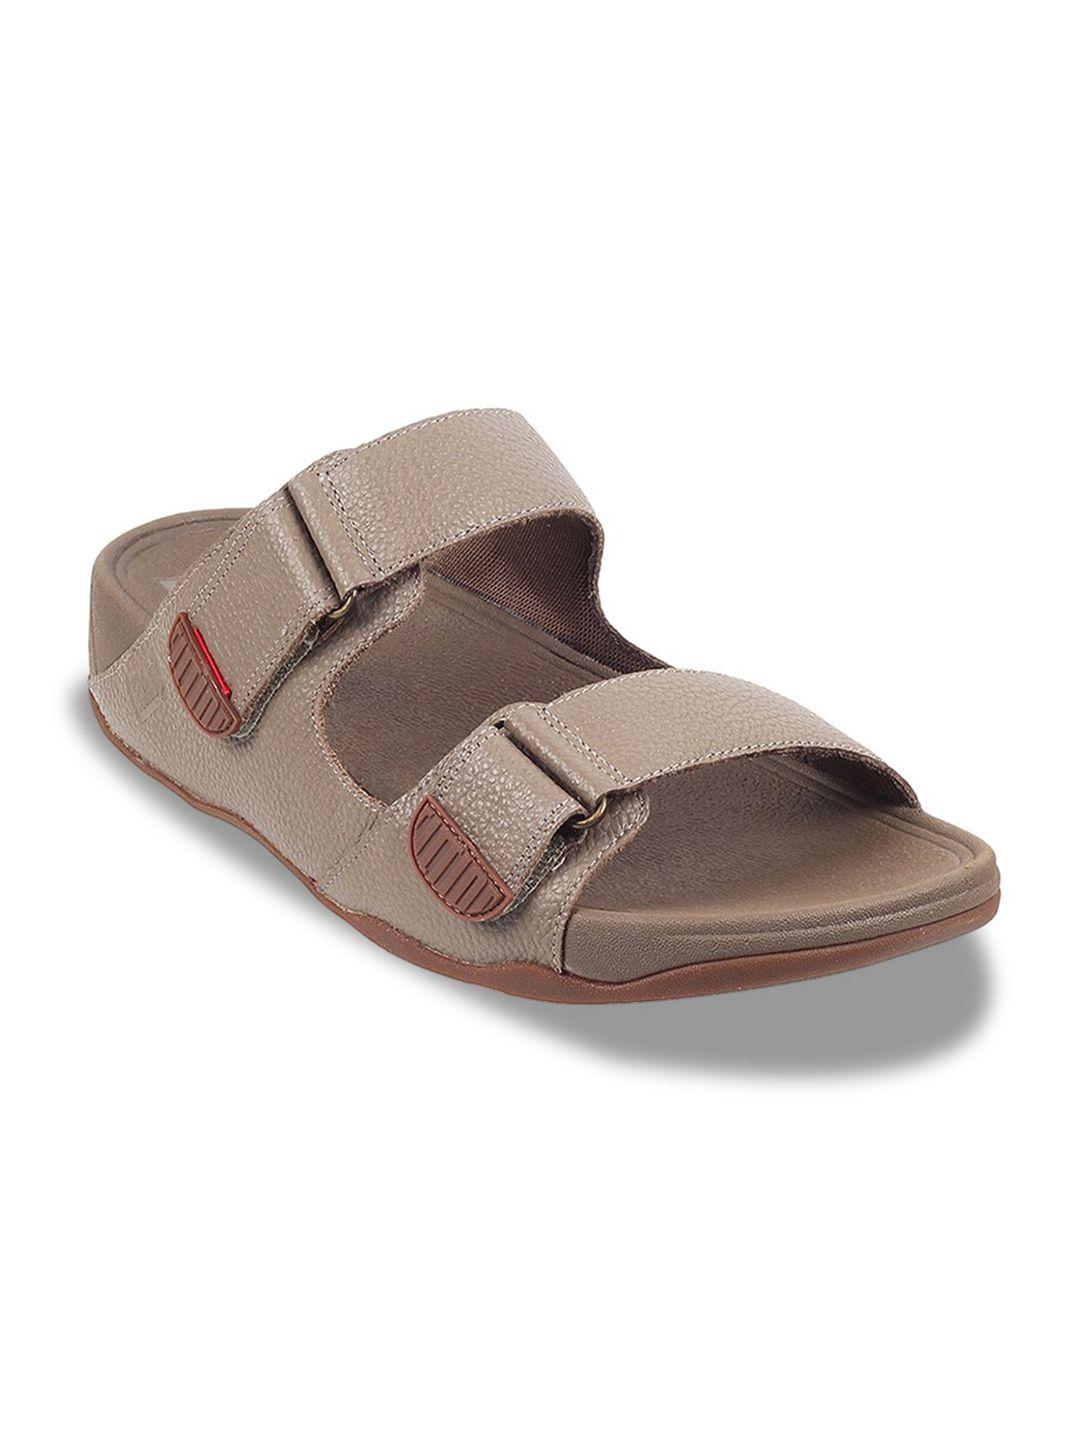 fitflop men two straps leather comfort sandals